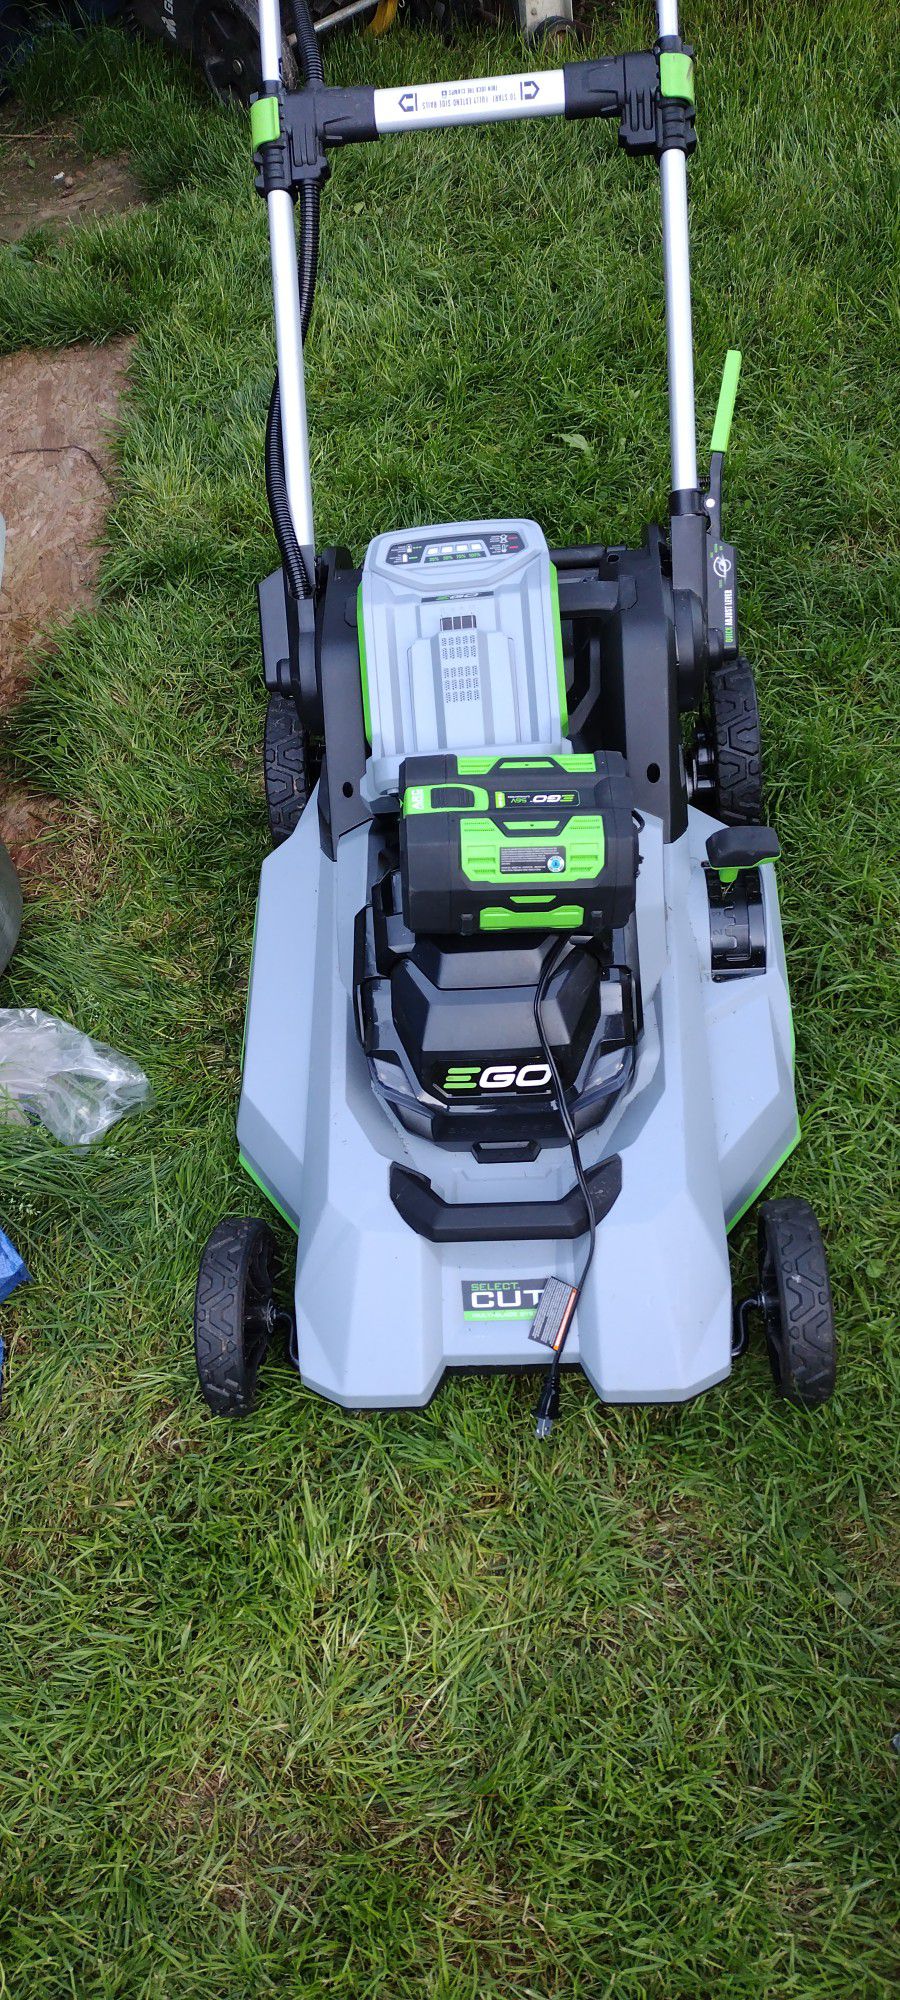 ego lawn mower selling for parts